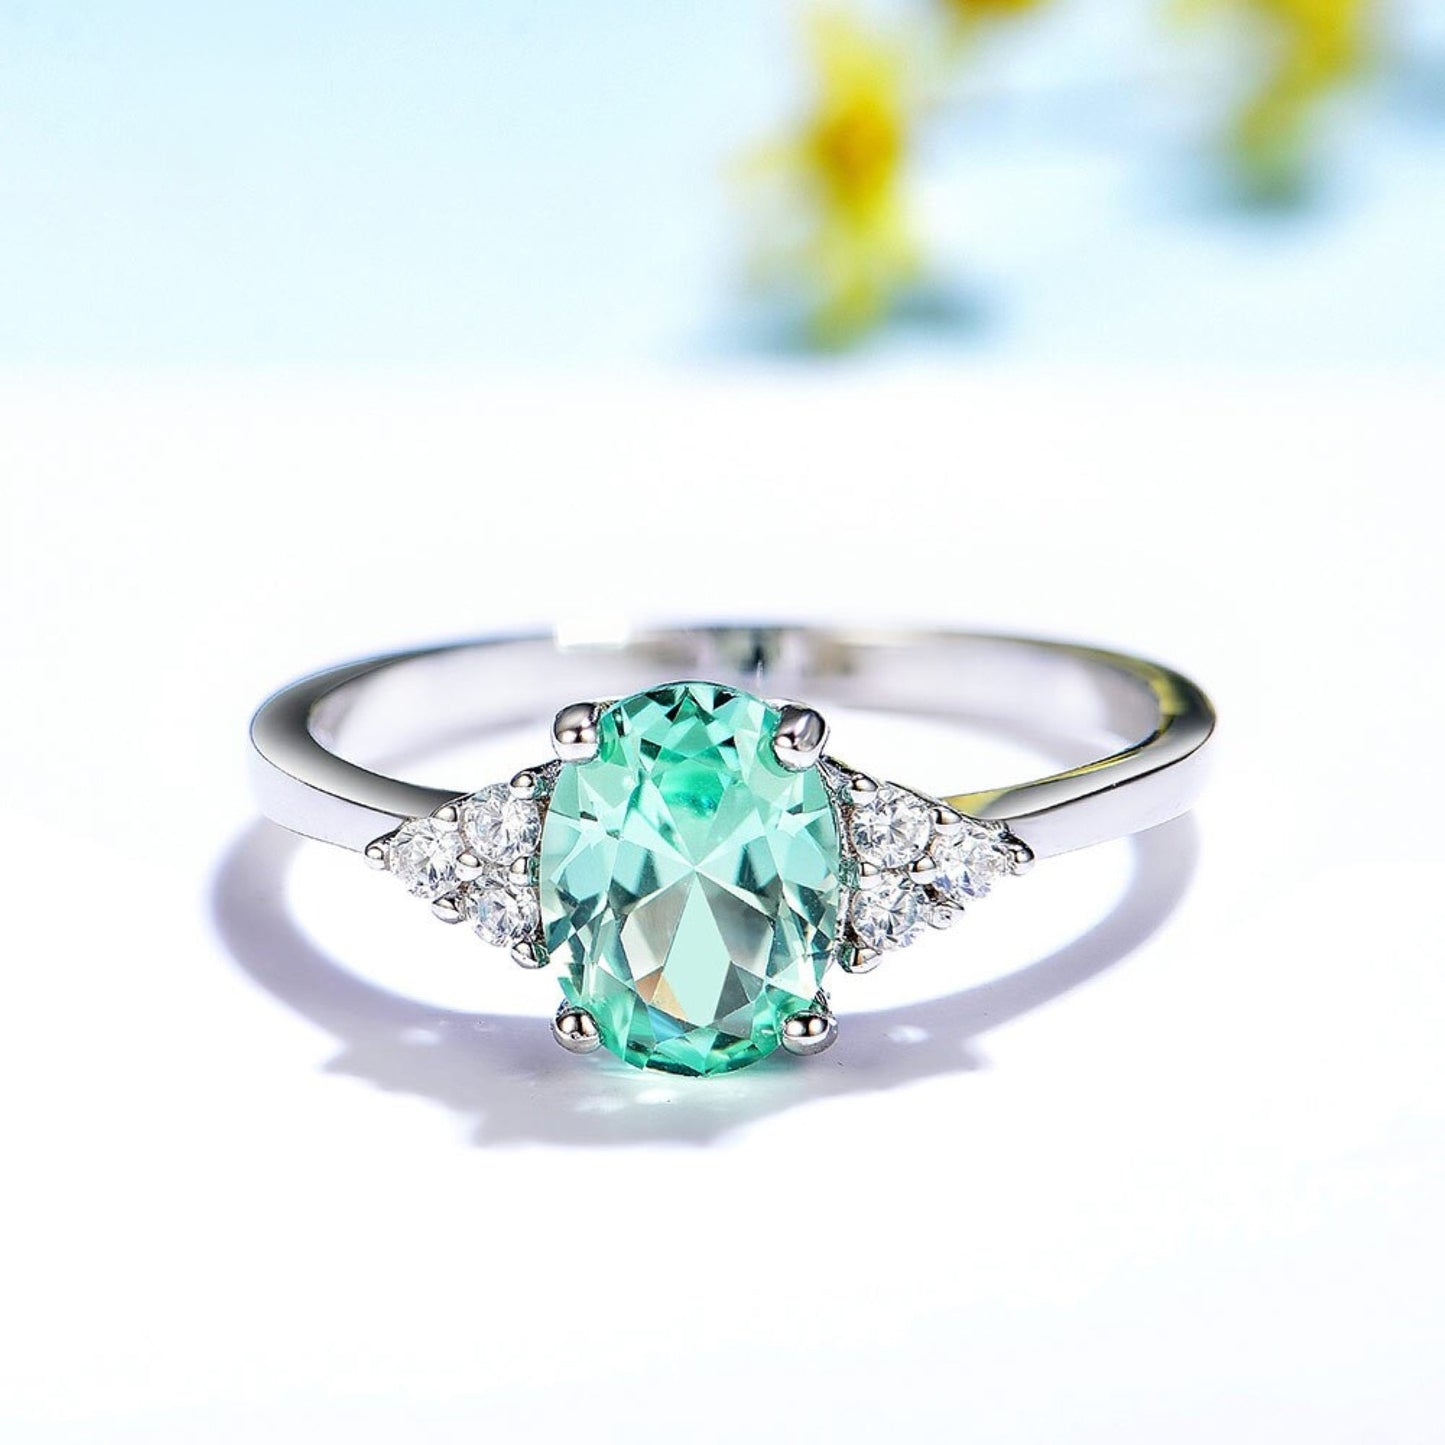 Oval Emerald Ring, Solid 925 Silver Gemstone Ring